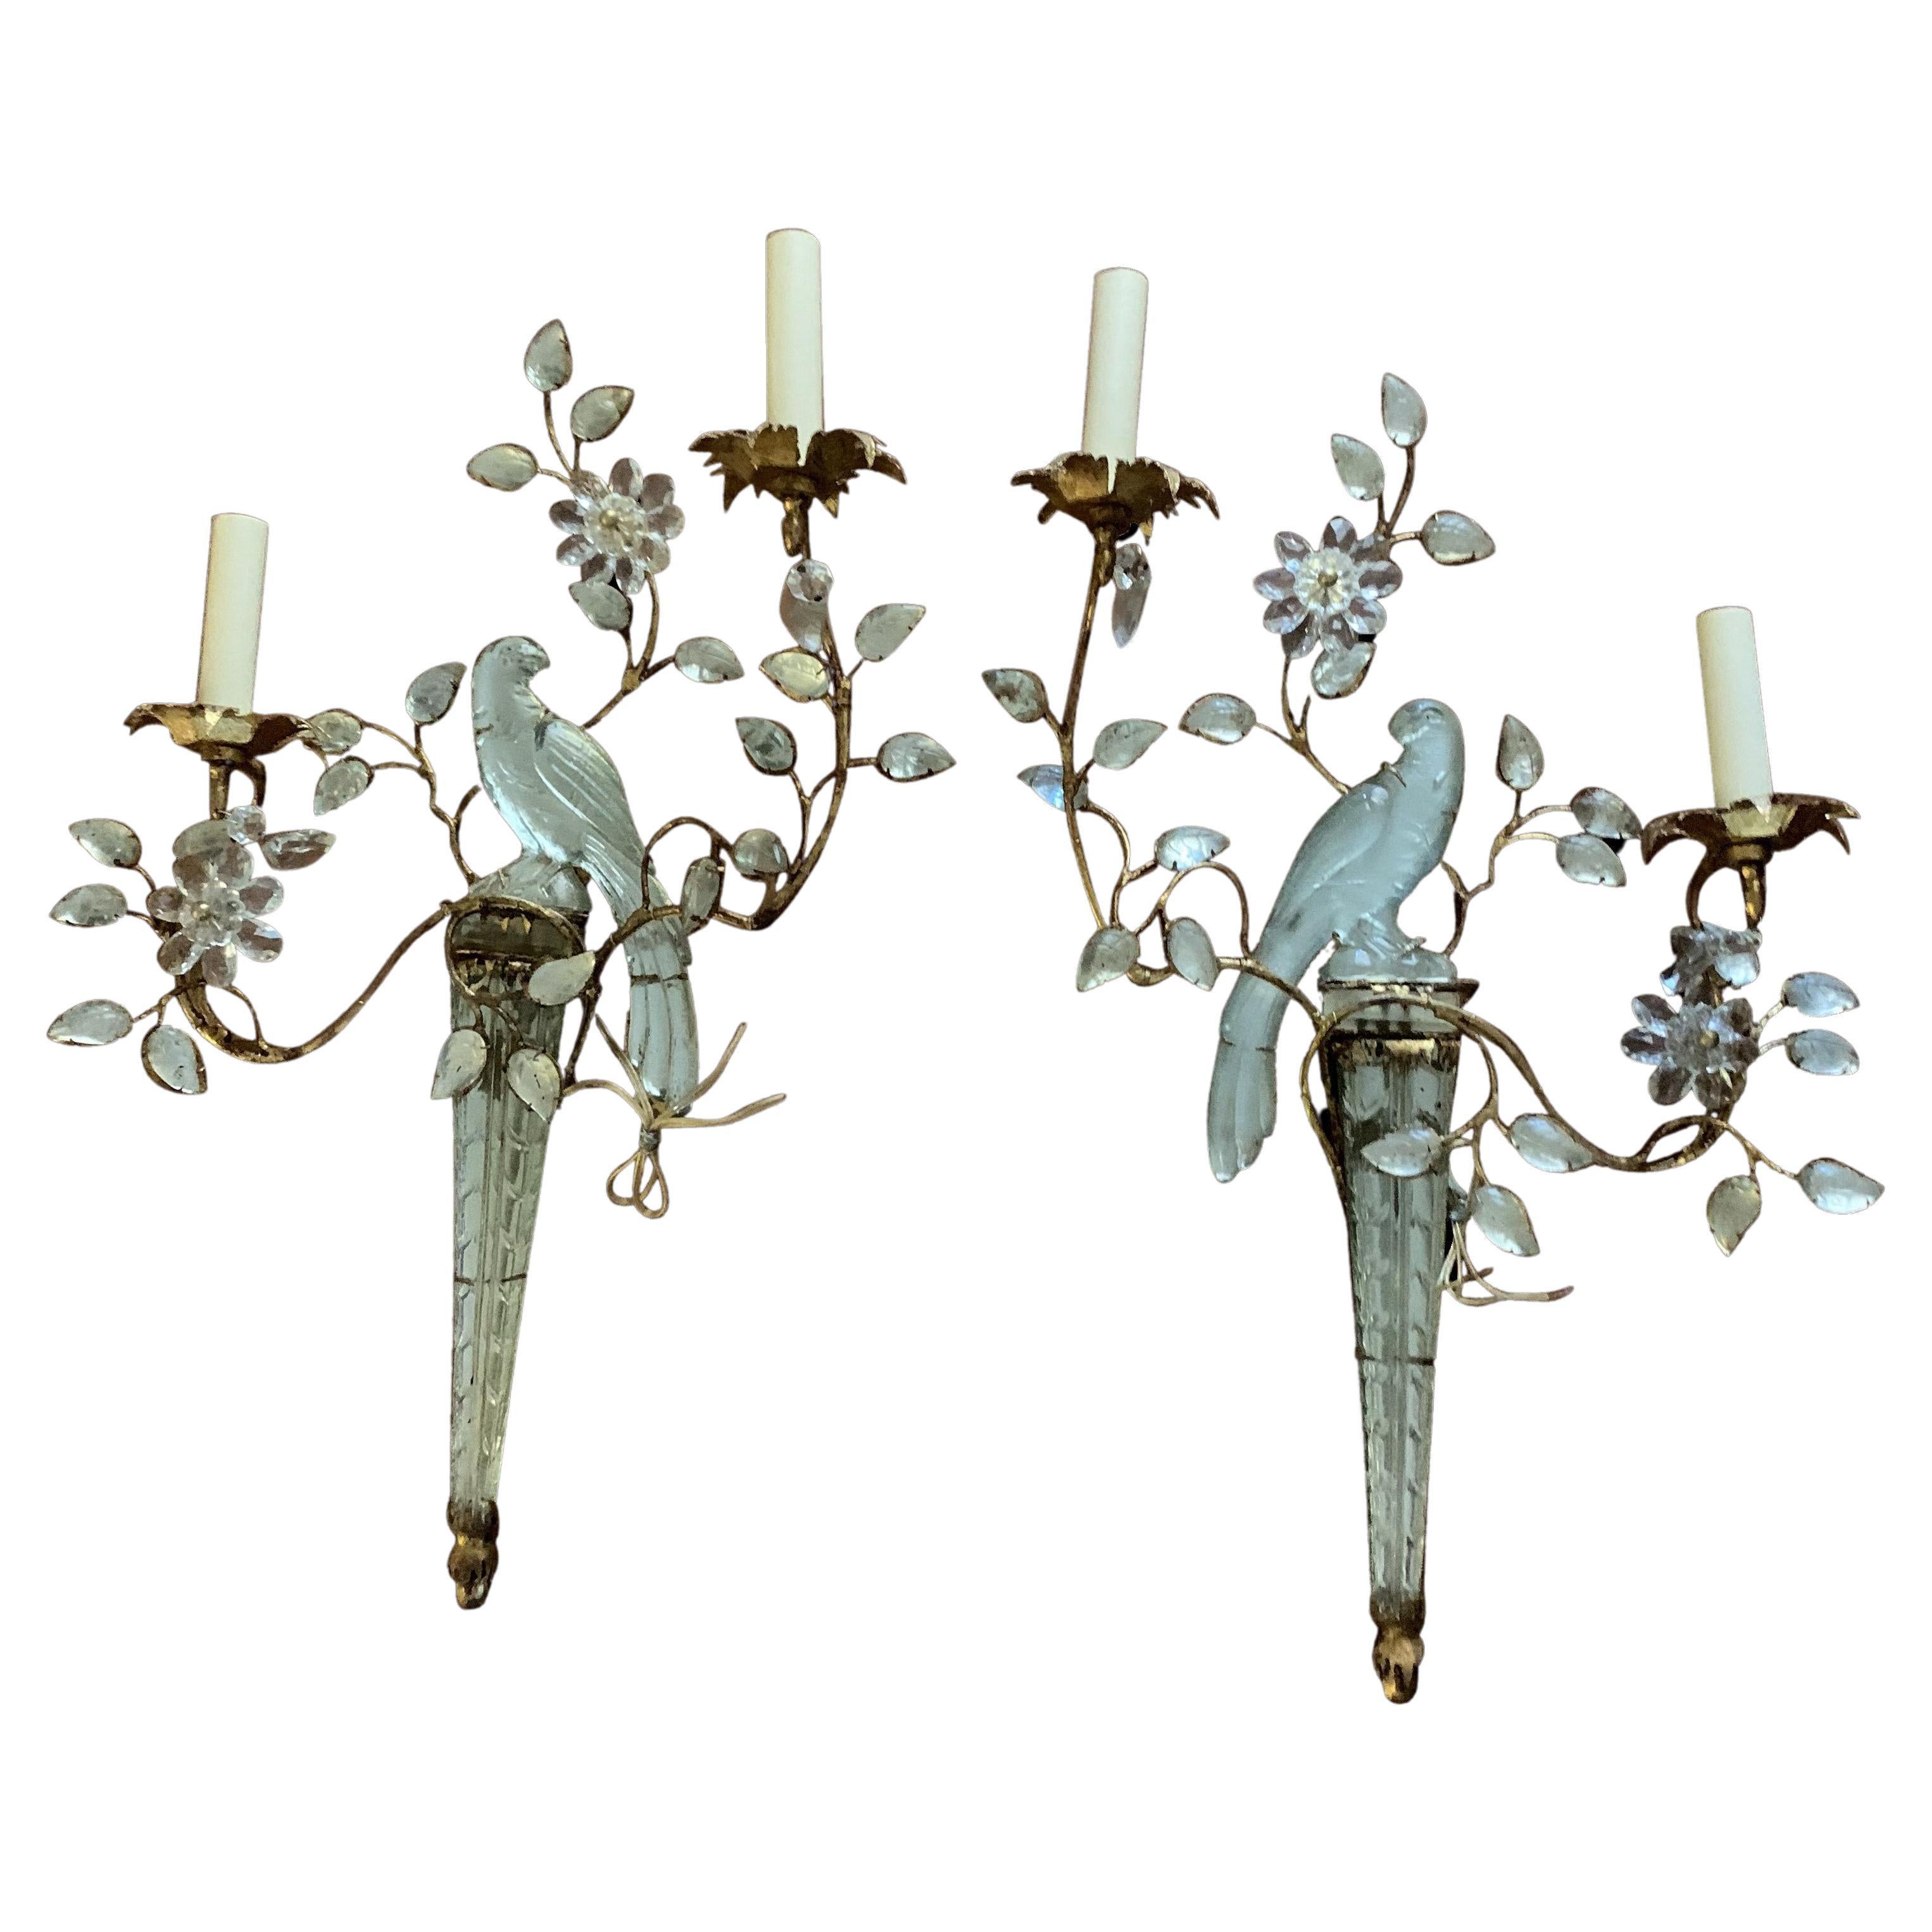 A pair of circa 1930's gilt metal sconces with glass bird's design and glass leaves